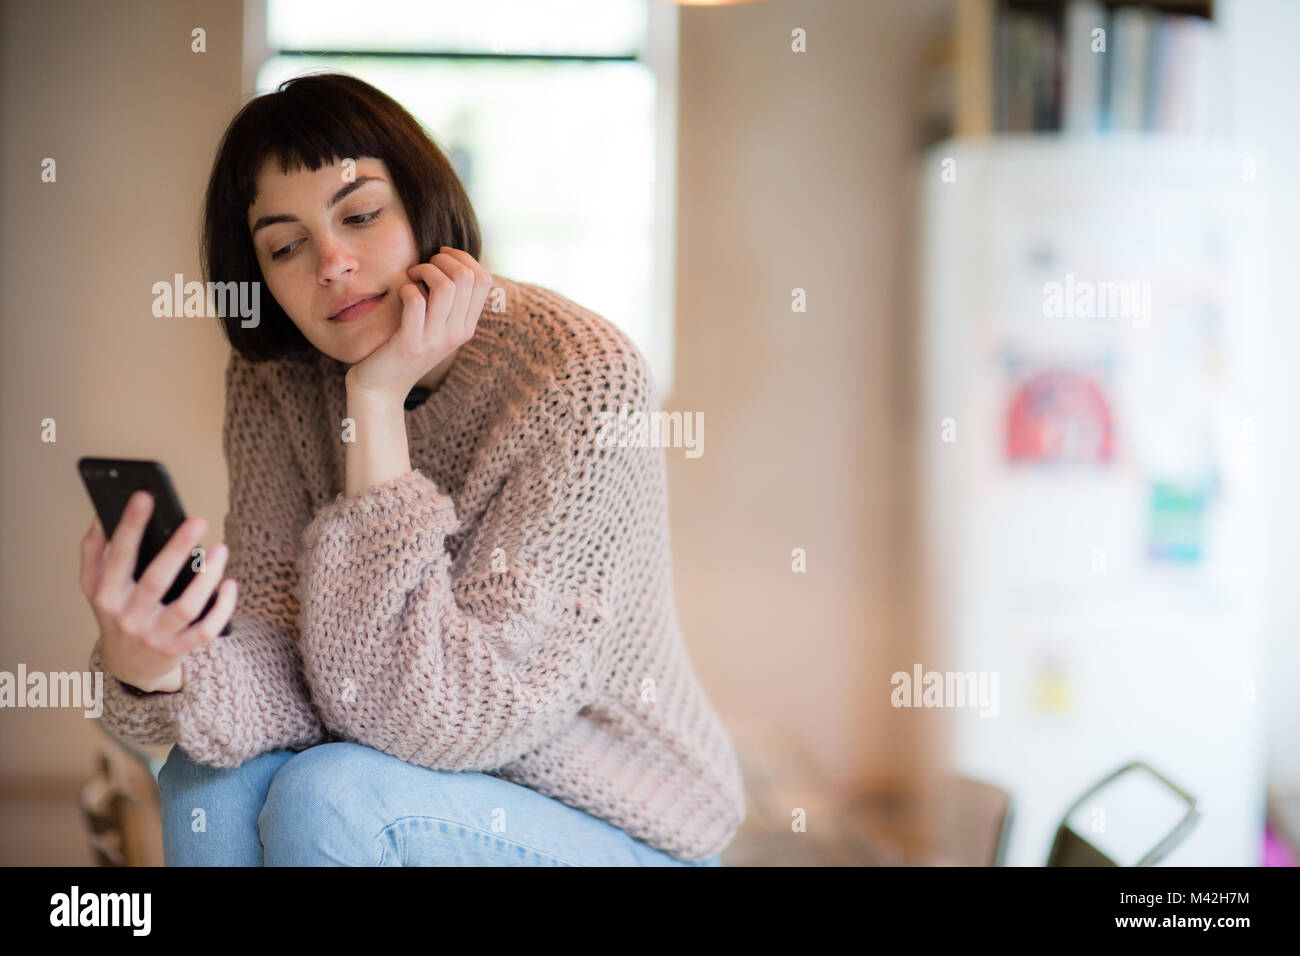 Young adult female checking her smartphone Stock Photo